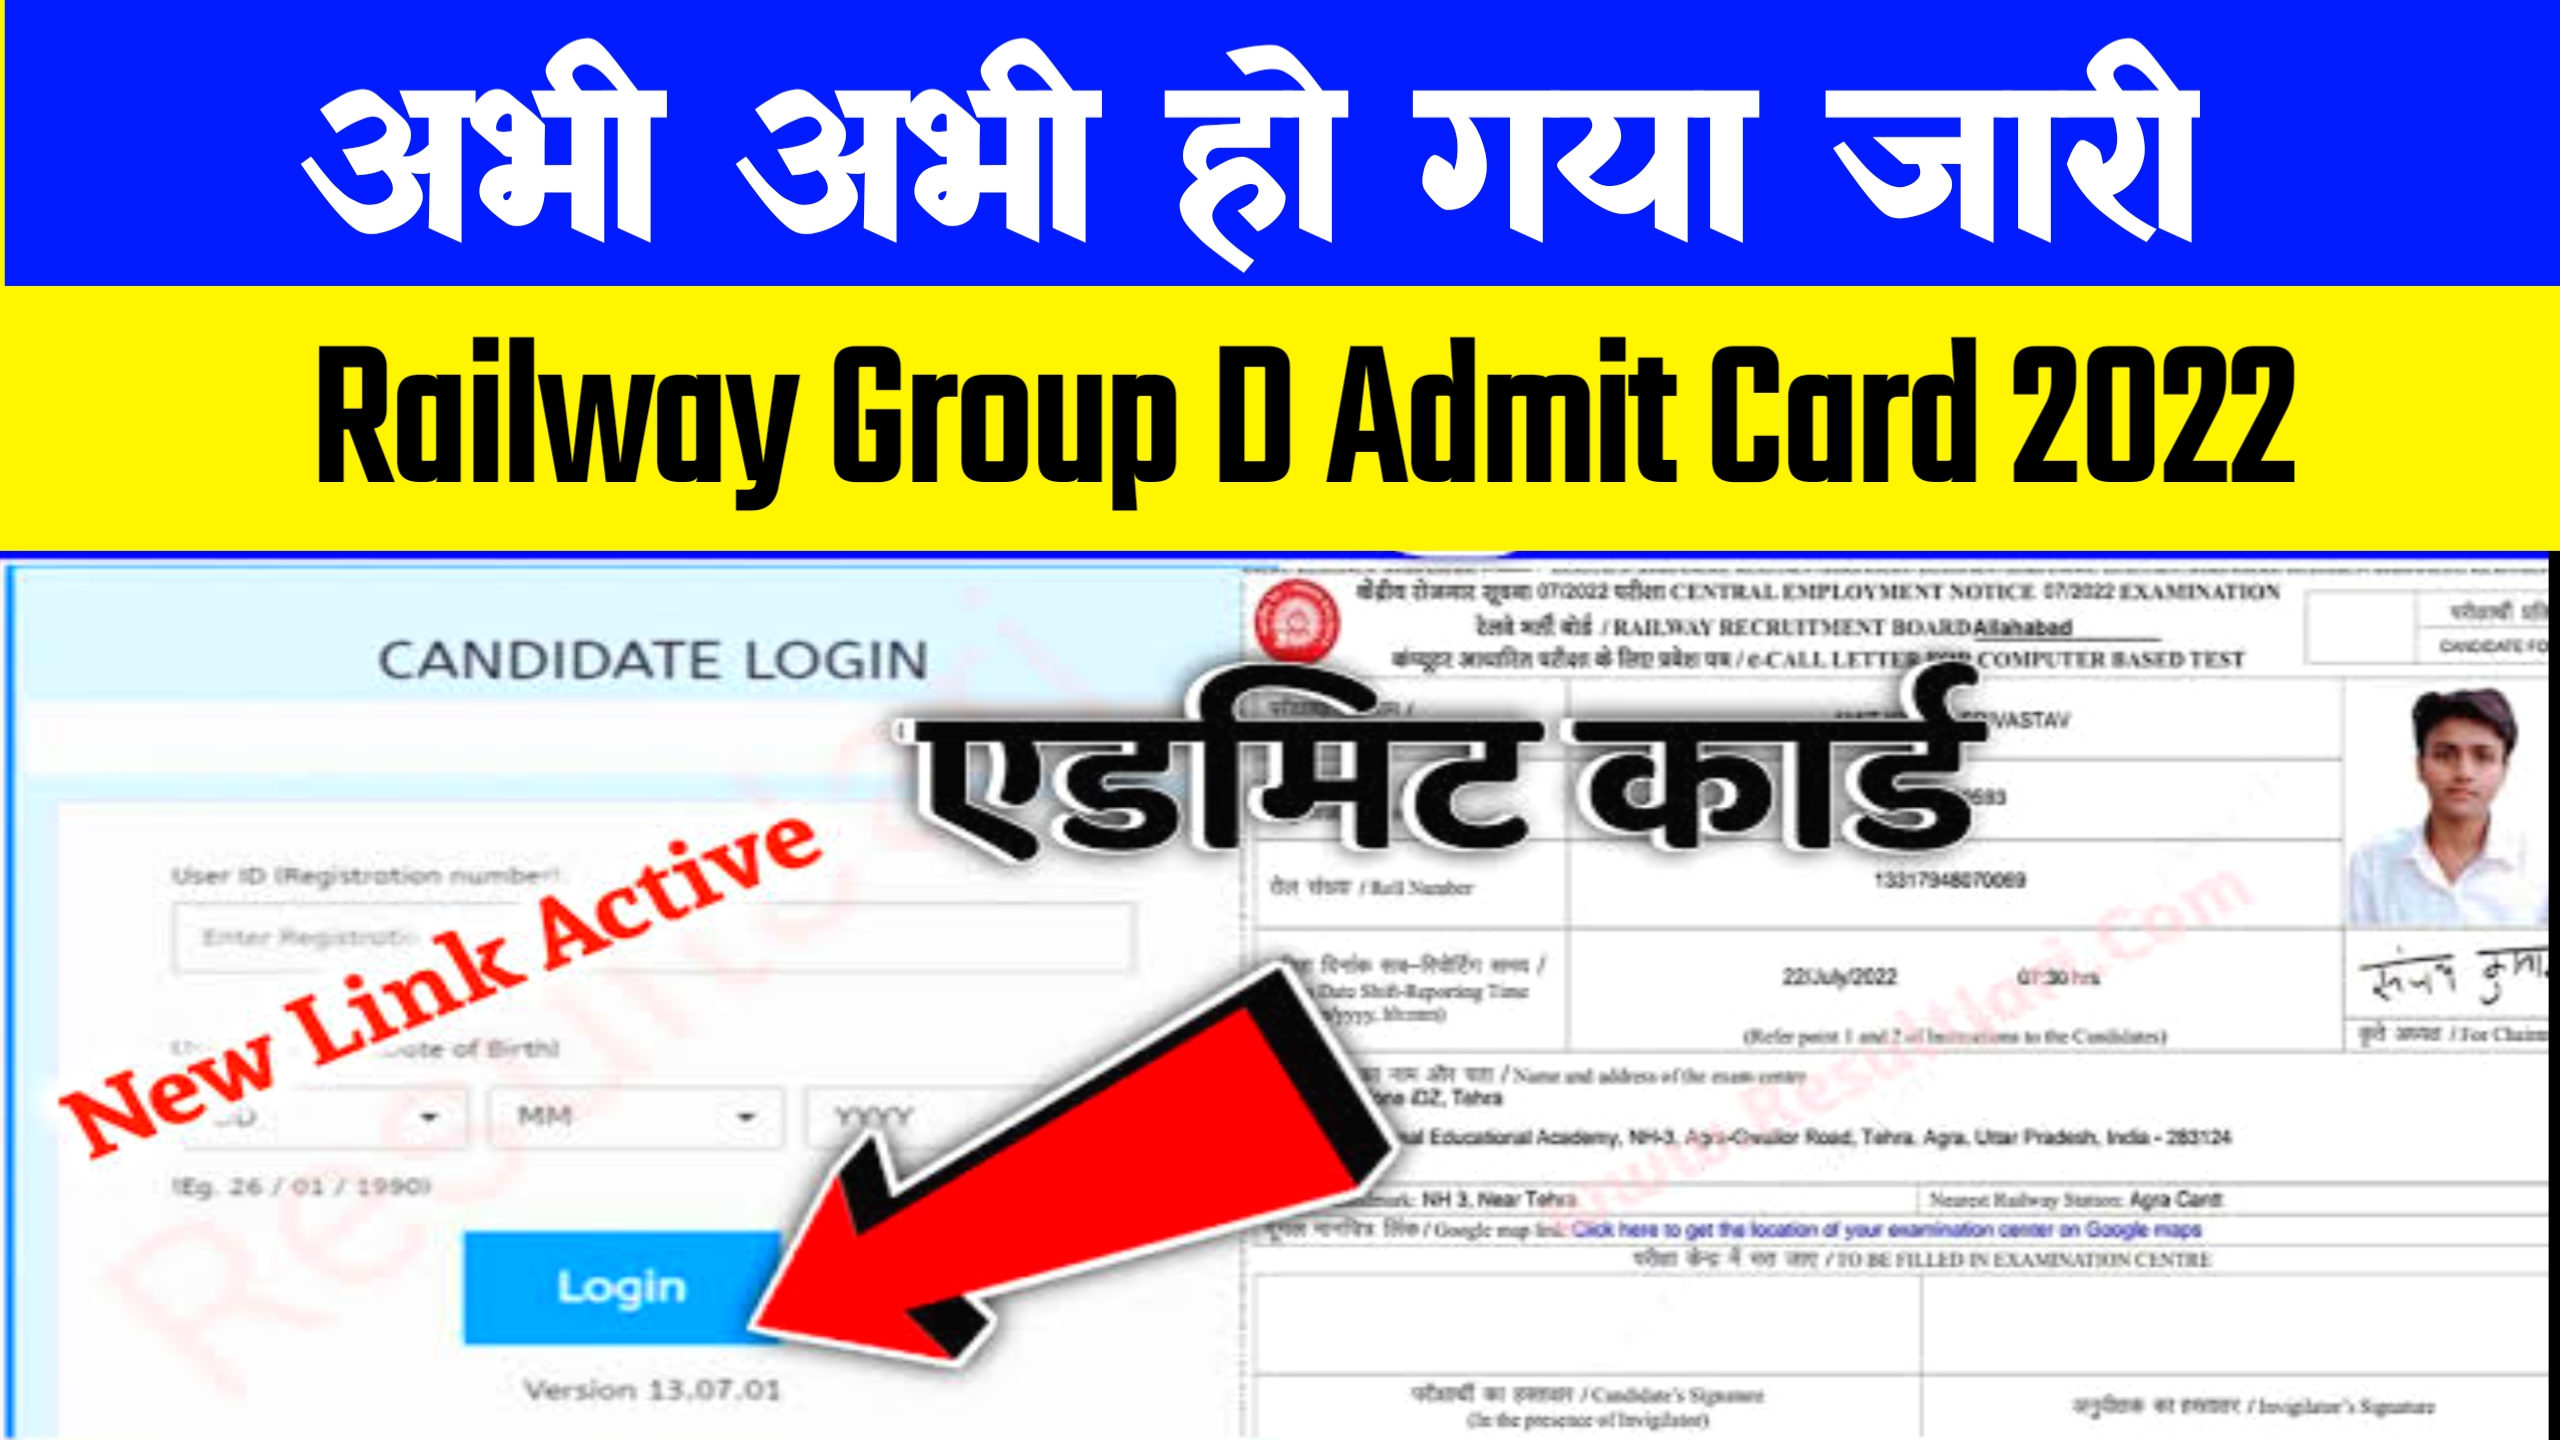 rrbcdg.gov.in Railway Group D Admit Card 2022 ~ Download Hall Ticket